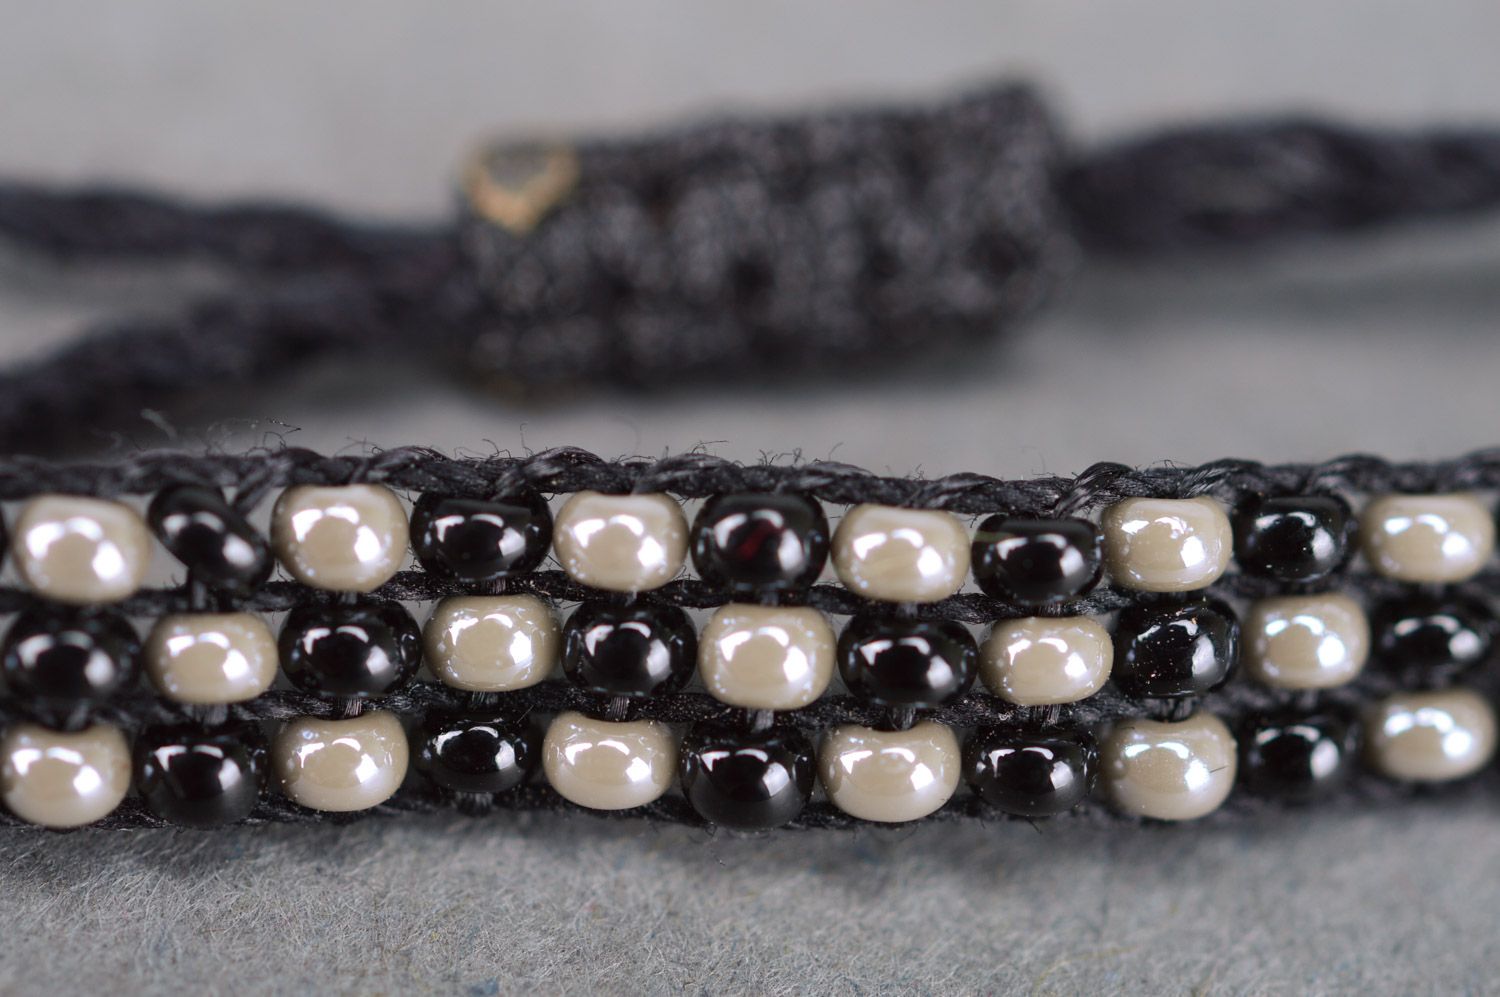 Handmade wrist bracelet woven of black and nacre beads with ties for women photo 4